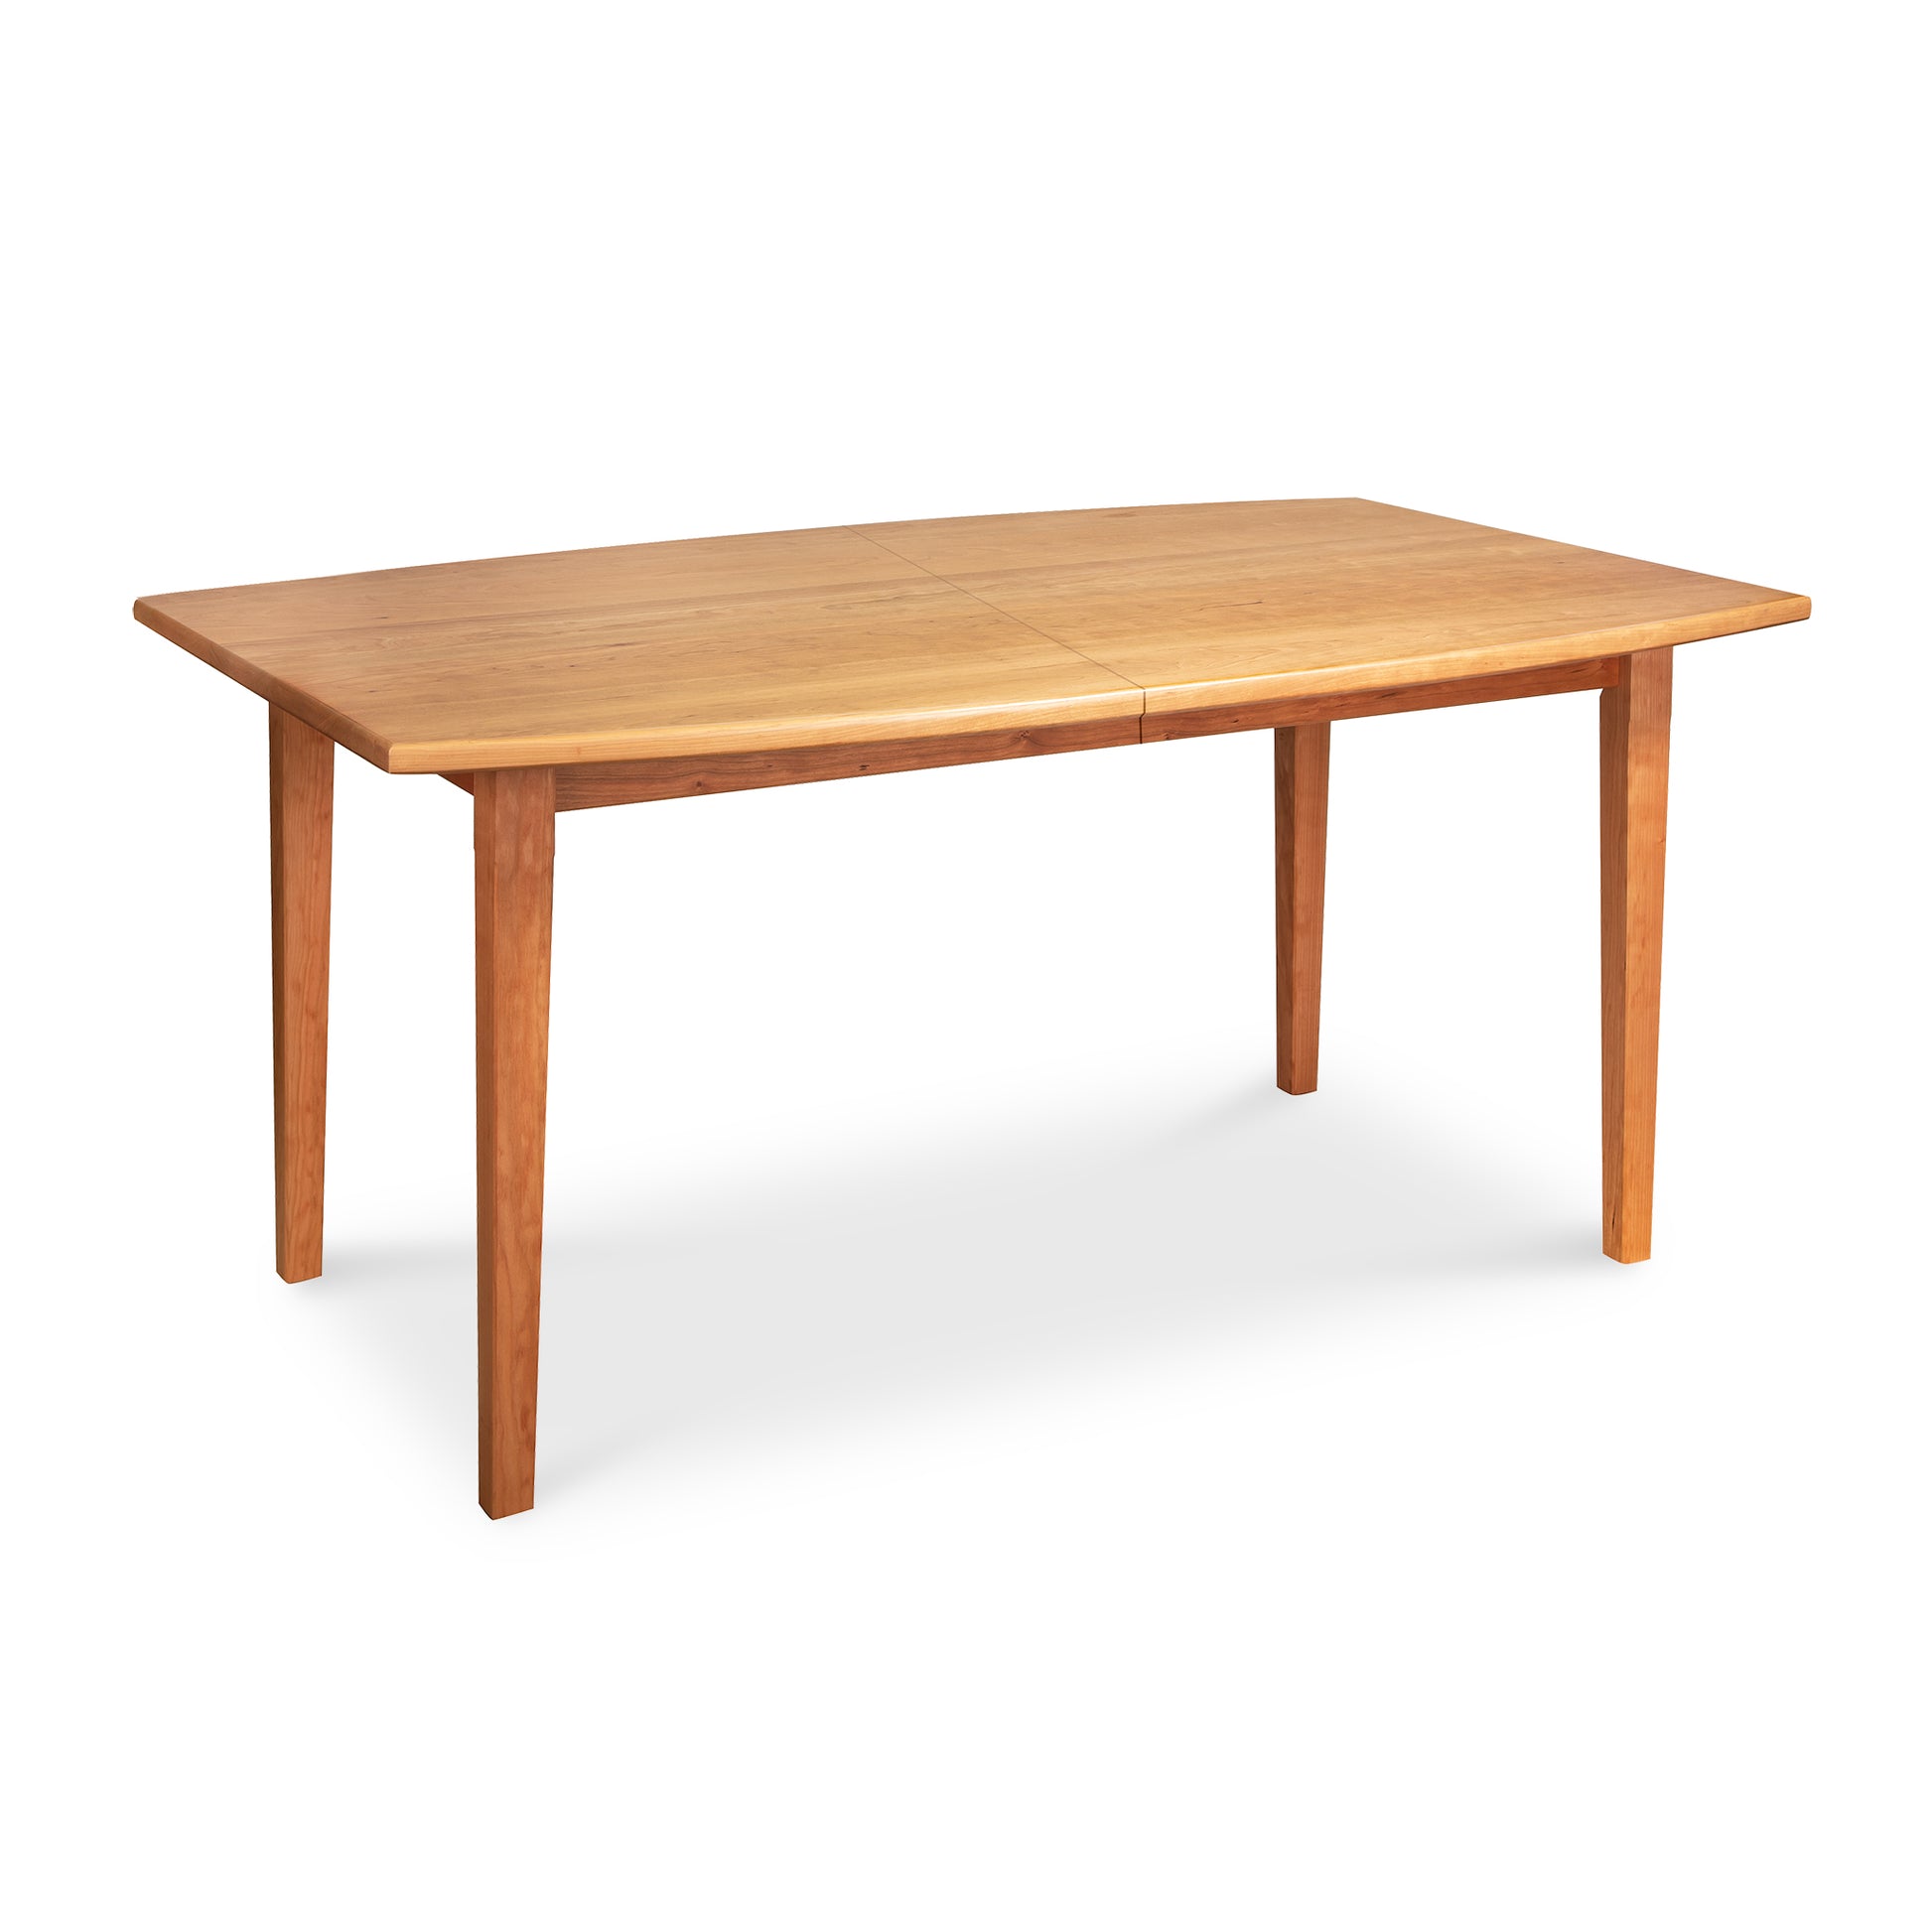 The Maple Corner Woodworks Vermont Shaker Boat Top Extension Dining Table is a handcrafted piece made with sustainably harvested wood, featuring a beautiful wooden top and sturdy legs.